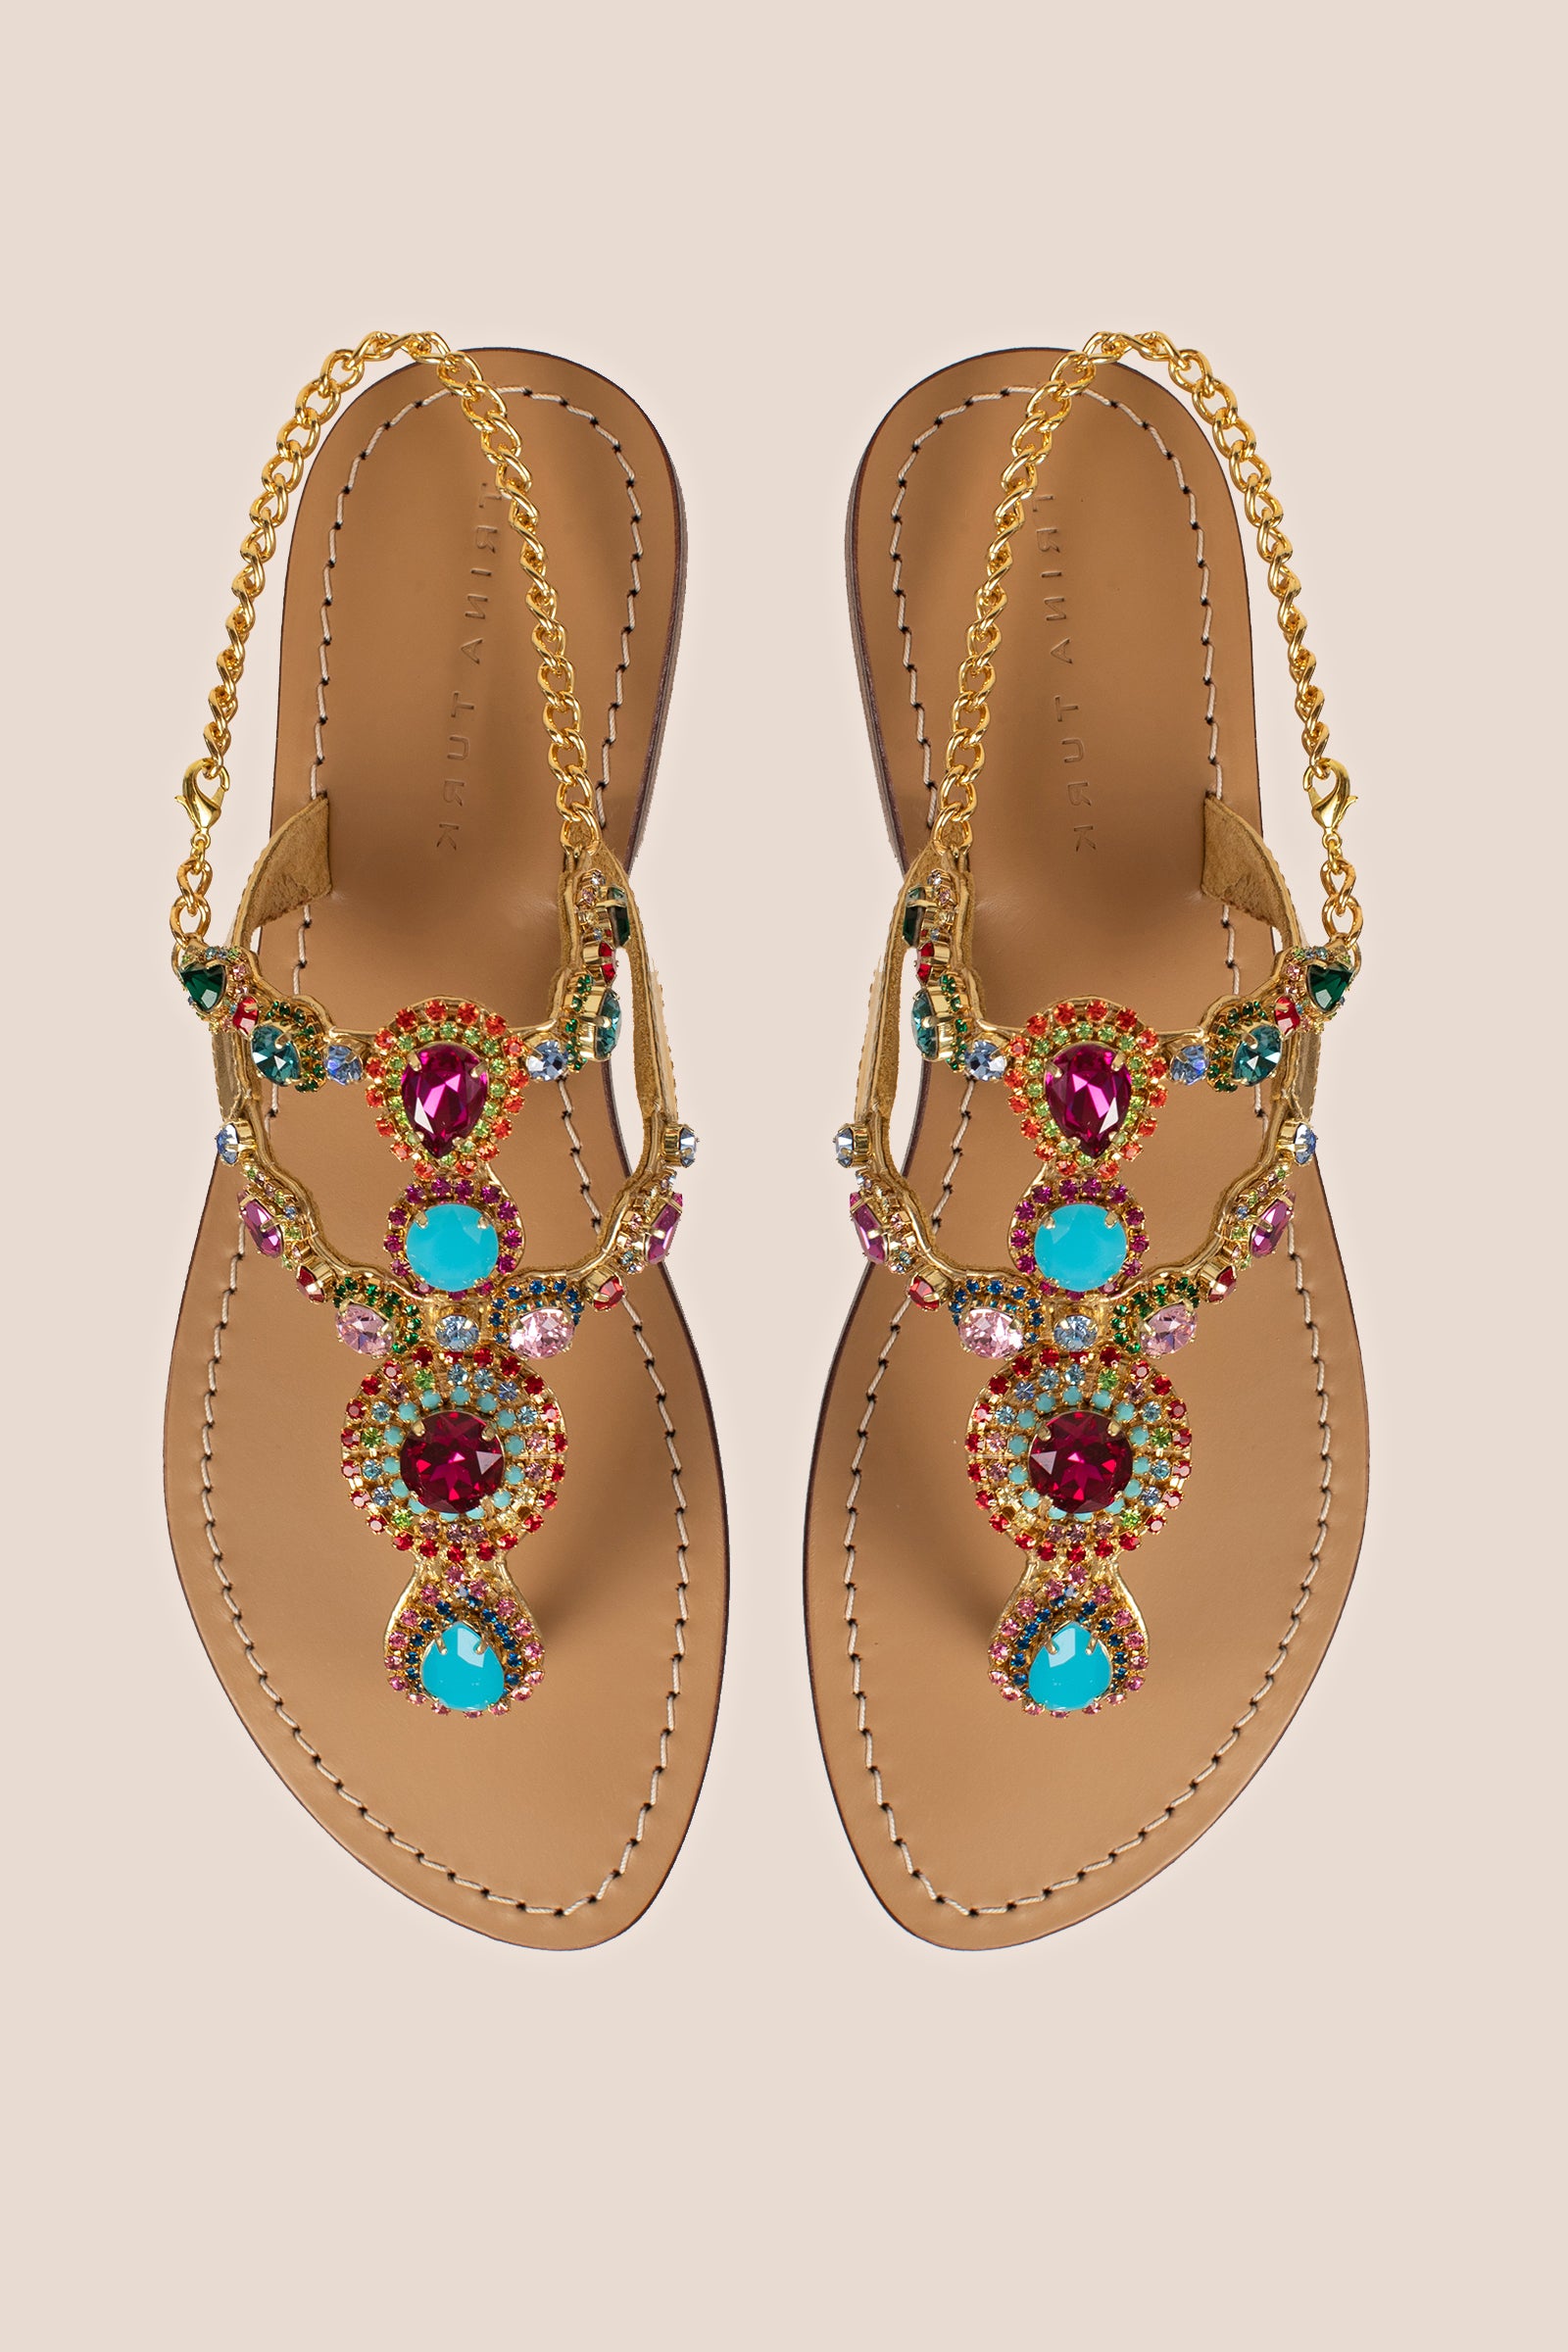 Update 148+ gold jeweled sandals